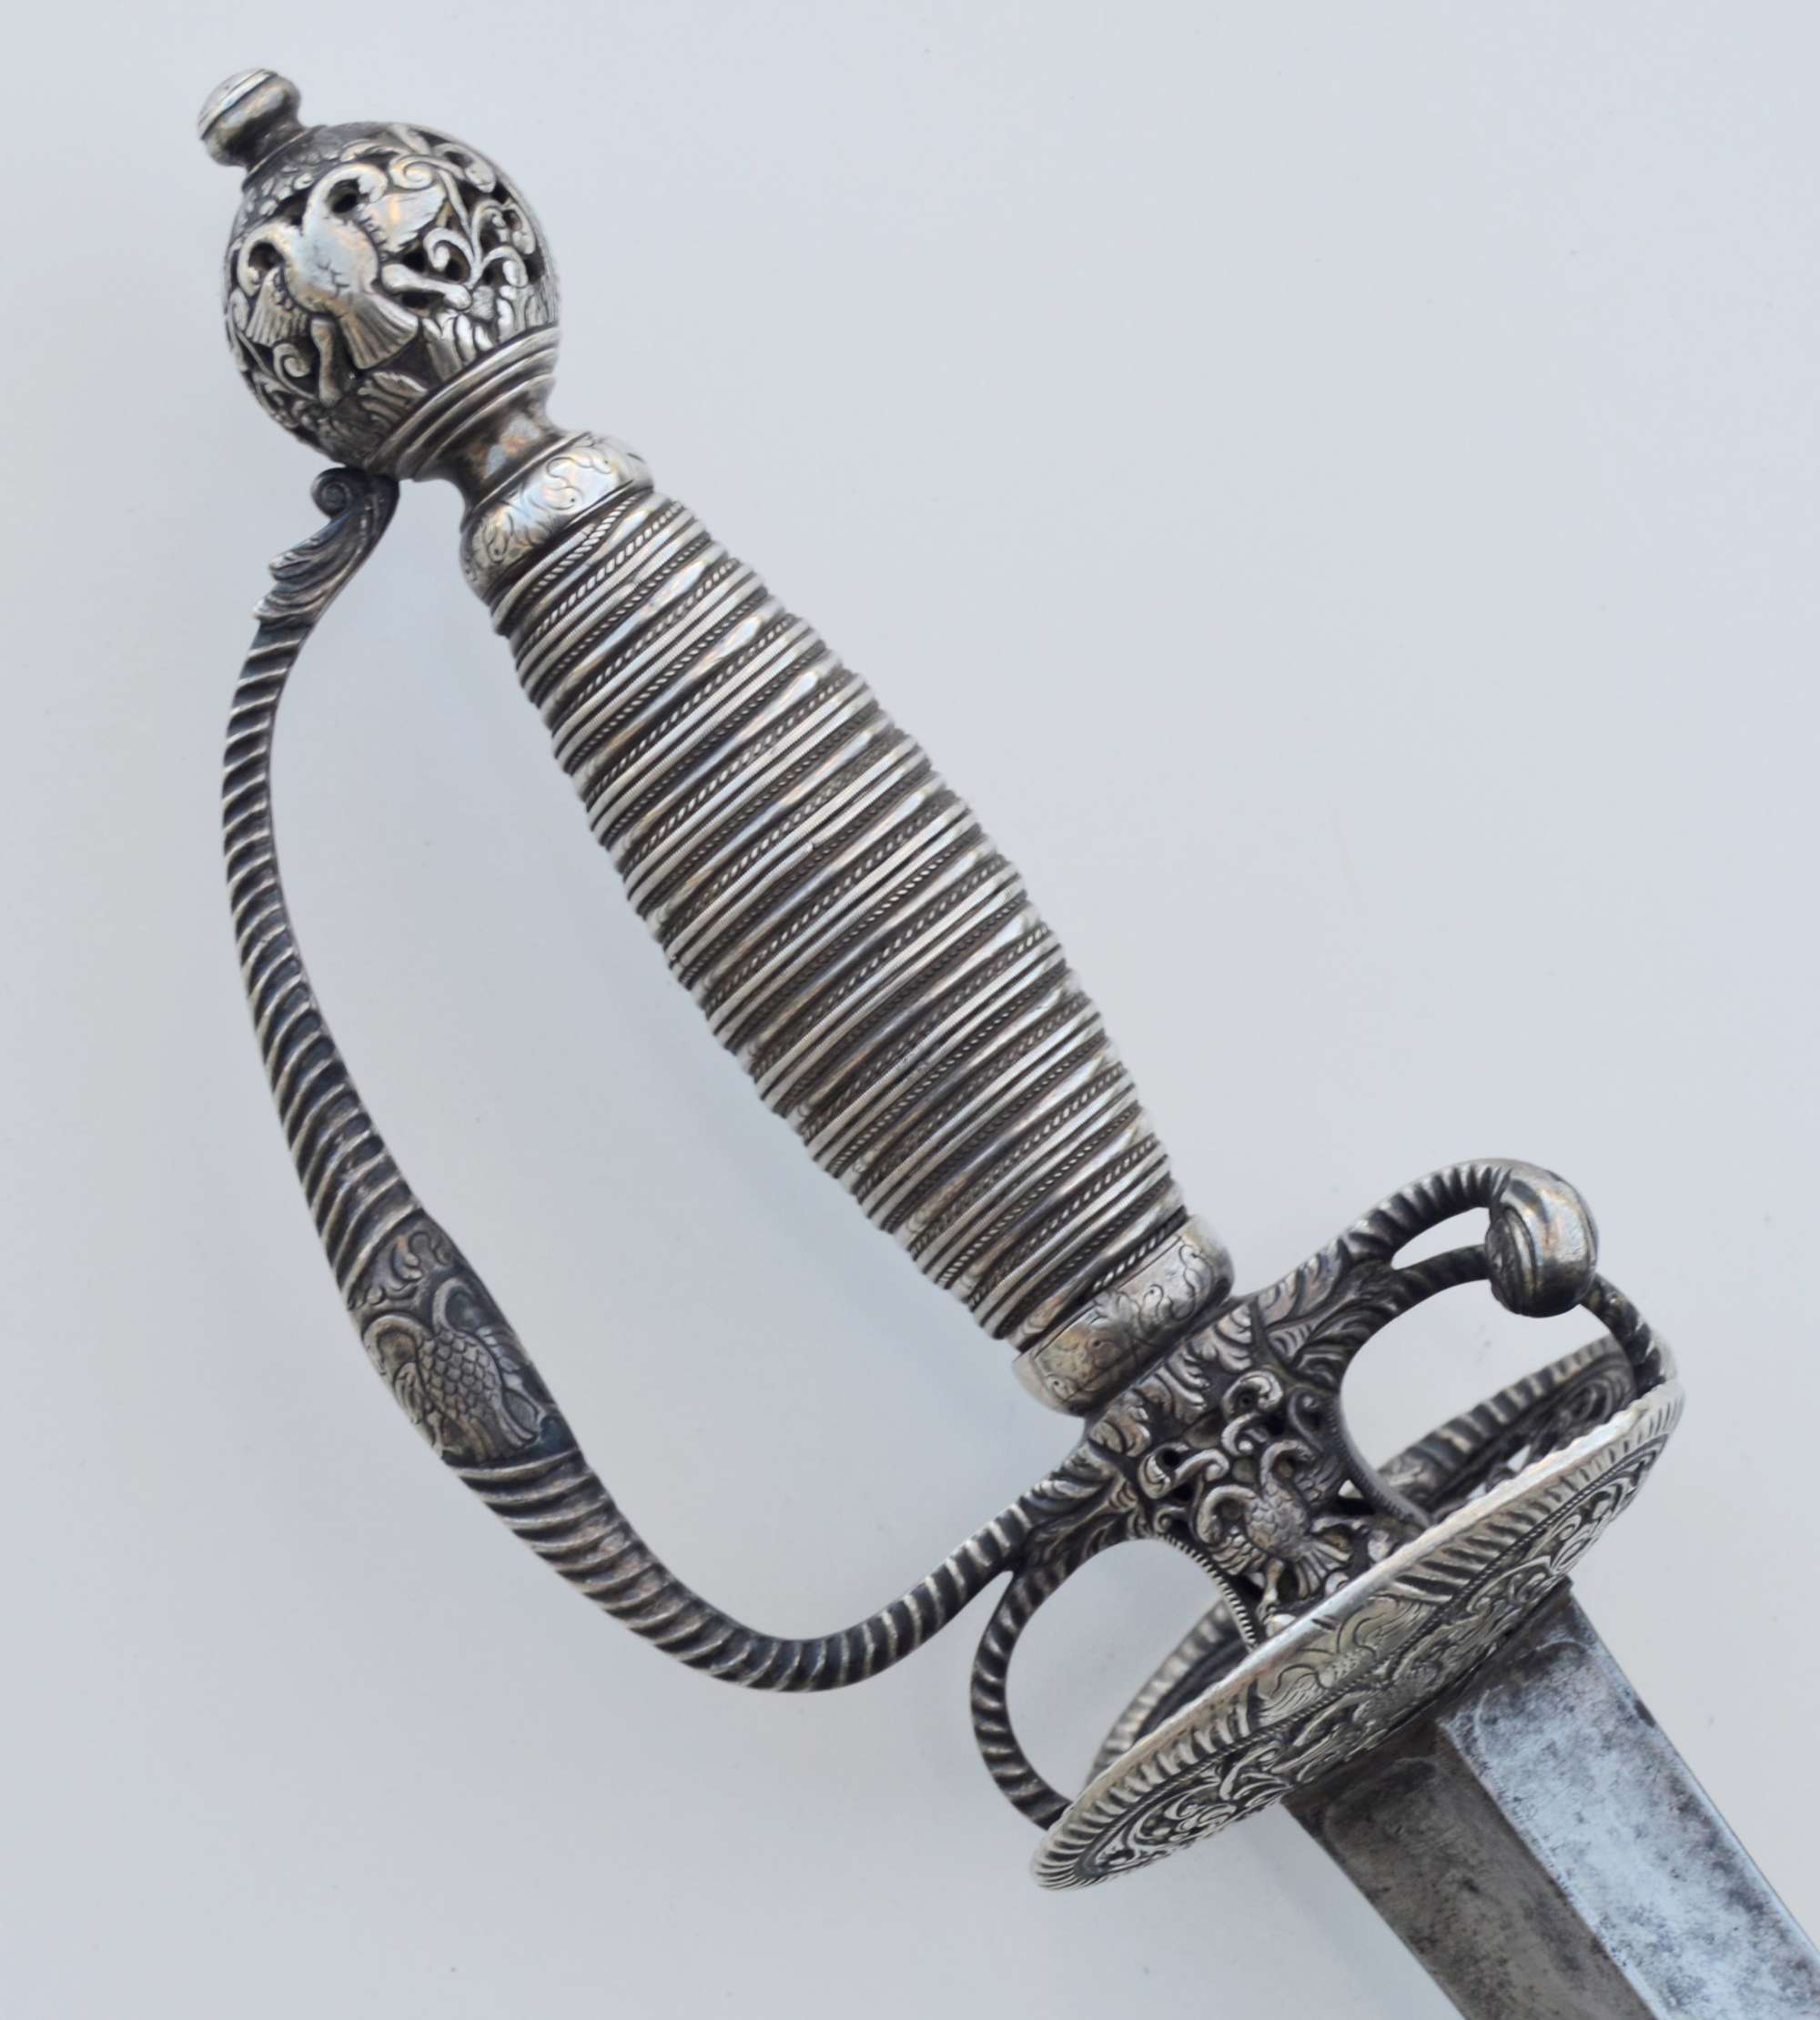 ﻿Silver-hilted Smallsword, 2nd Half 18th C, Probably German